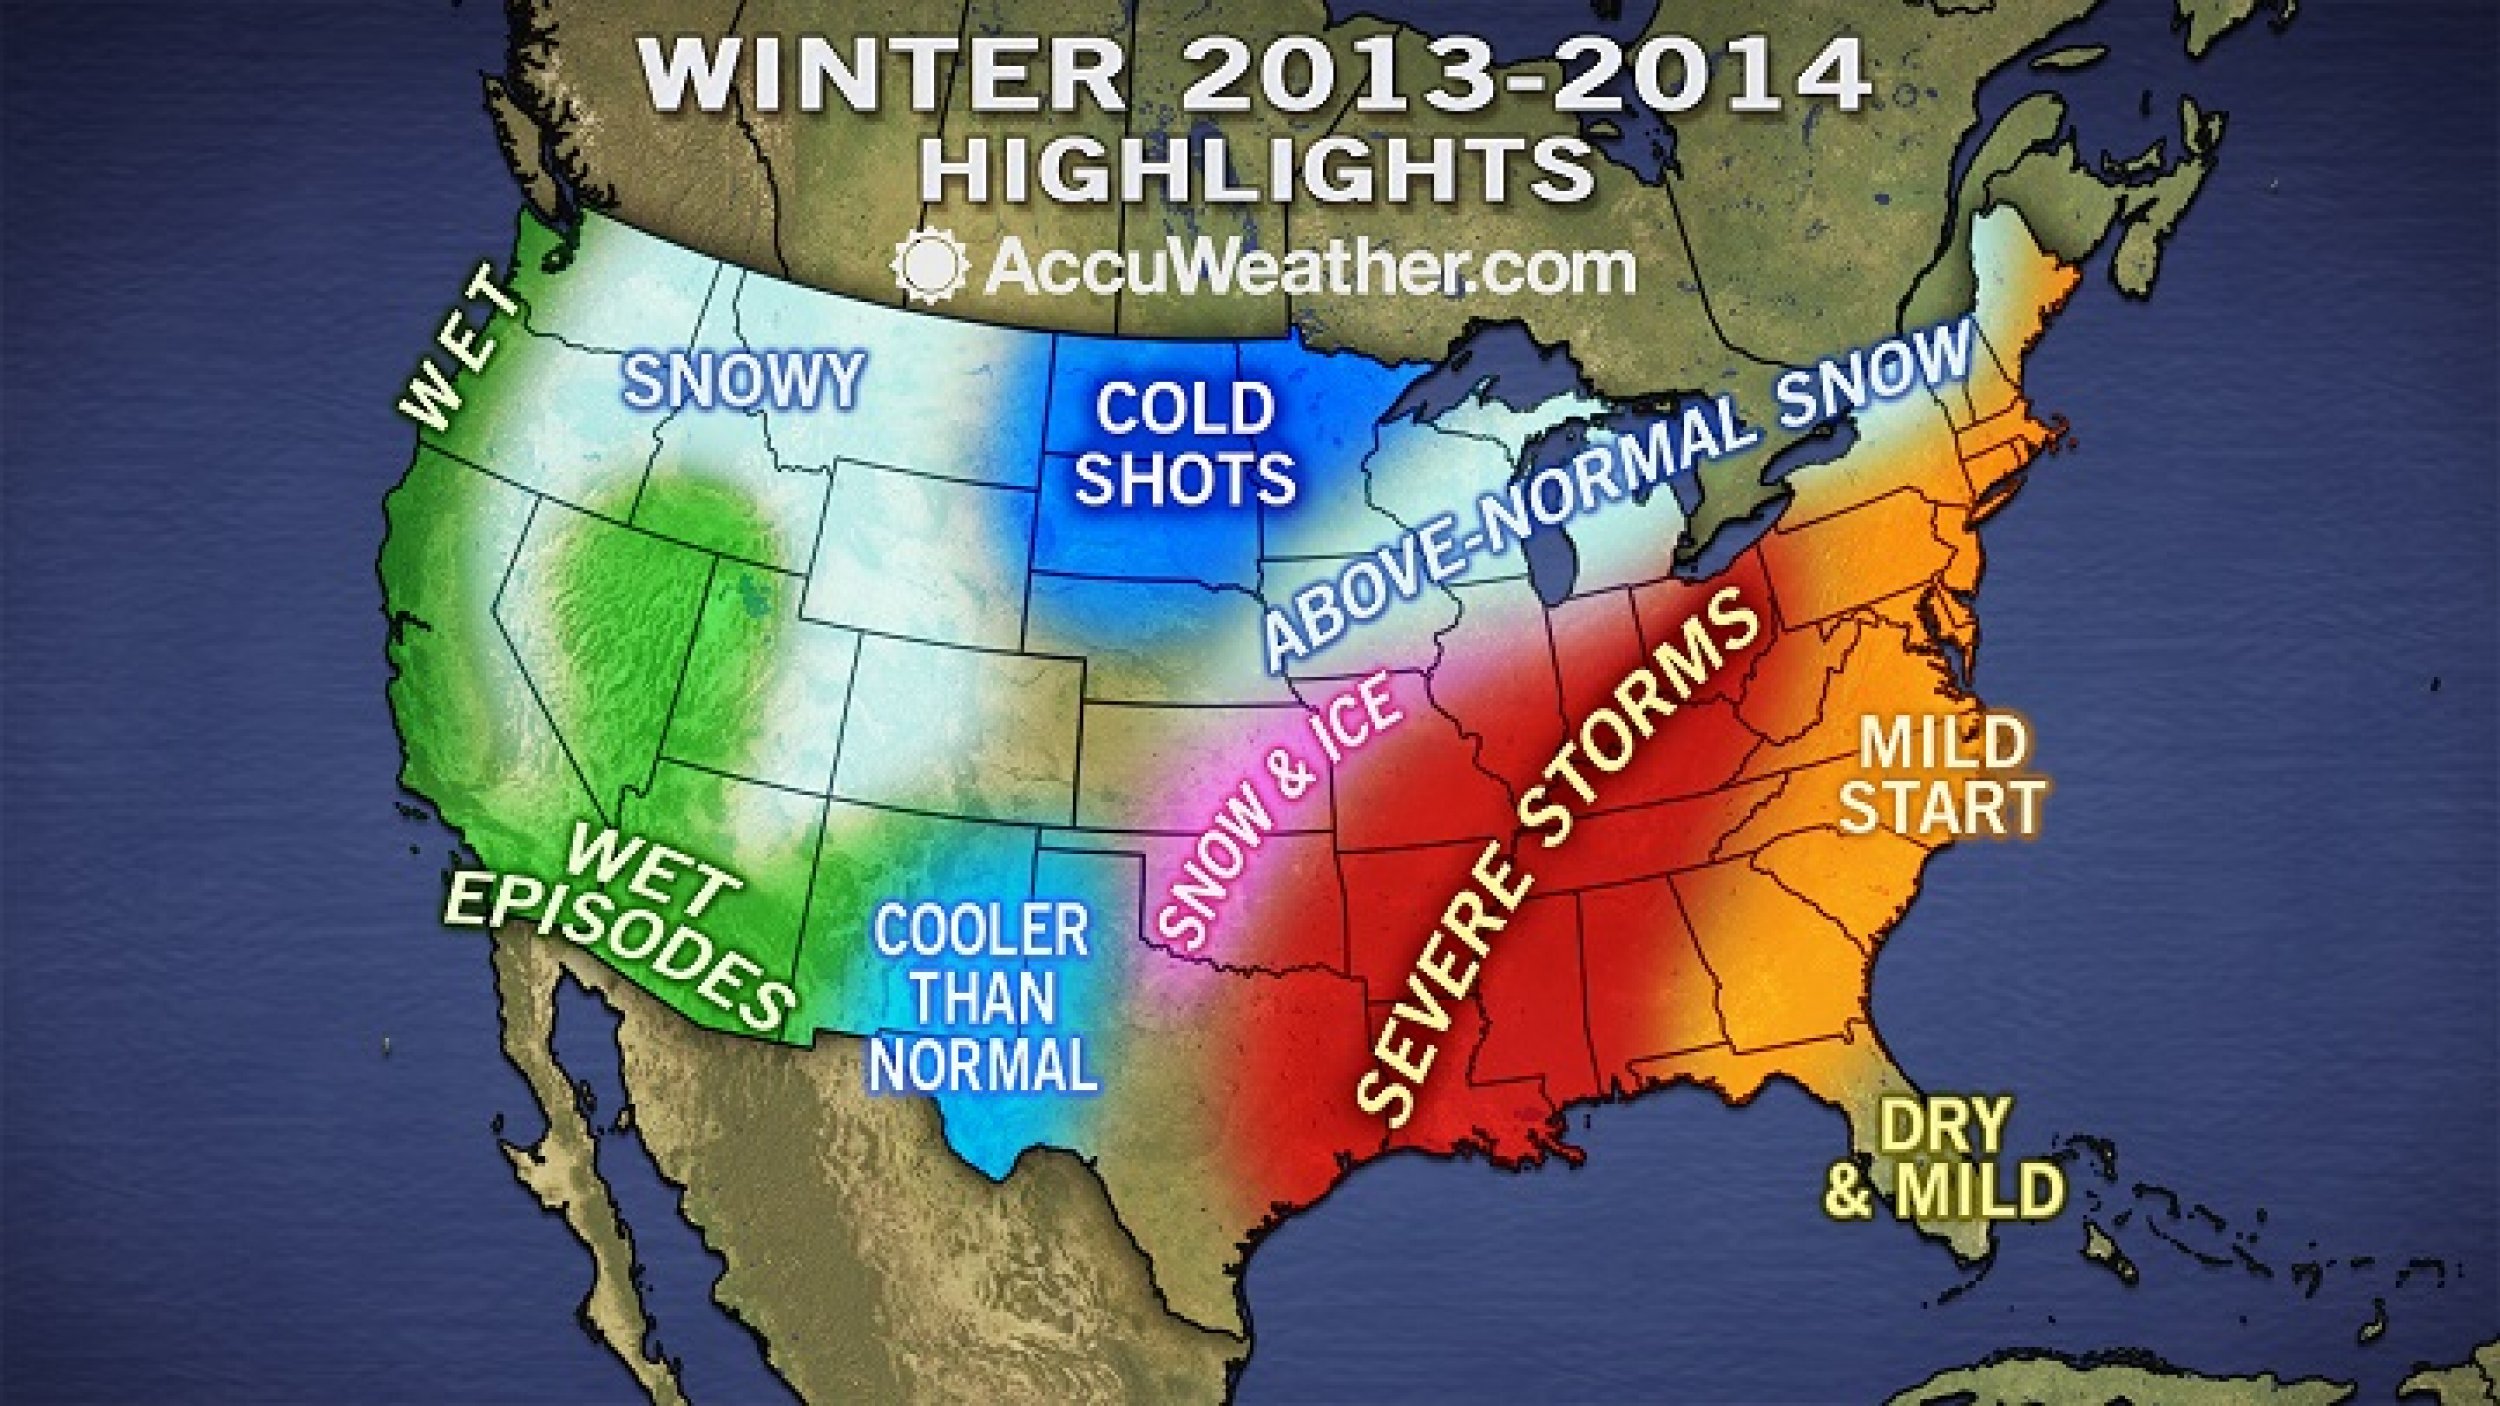 20132014 Winter Forecast Mild In The East, Warmer In South, Heavy